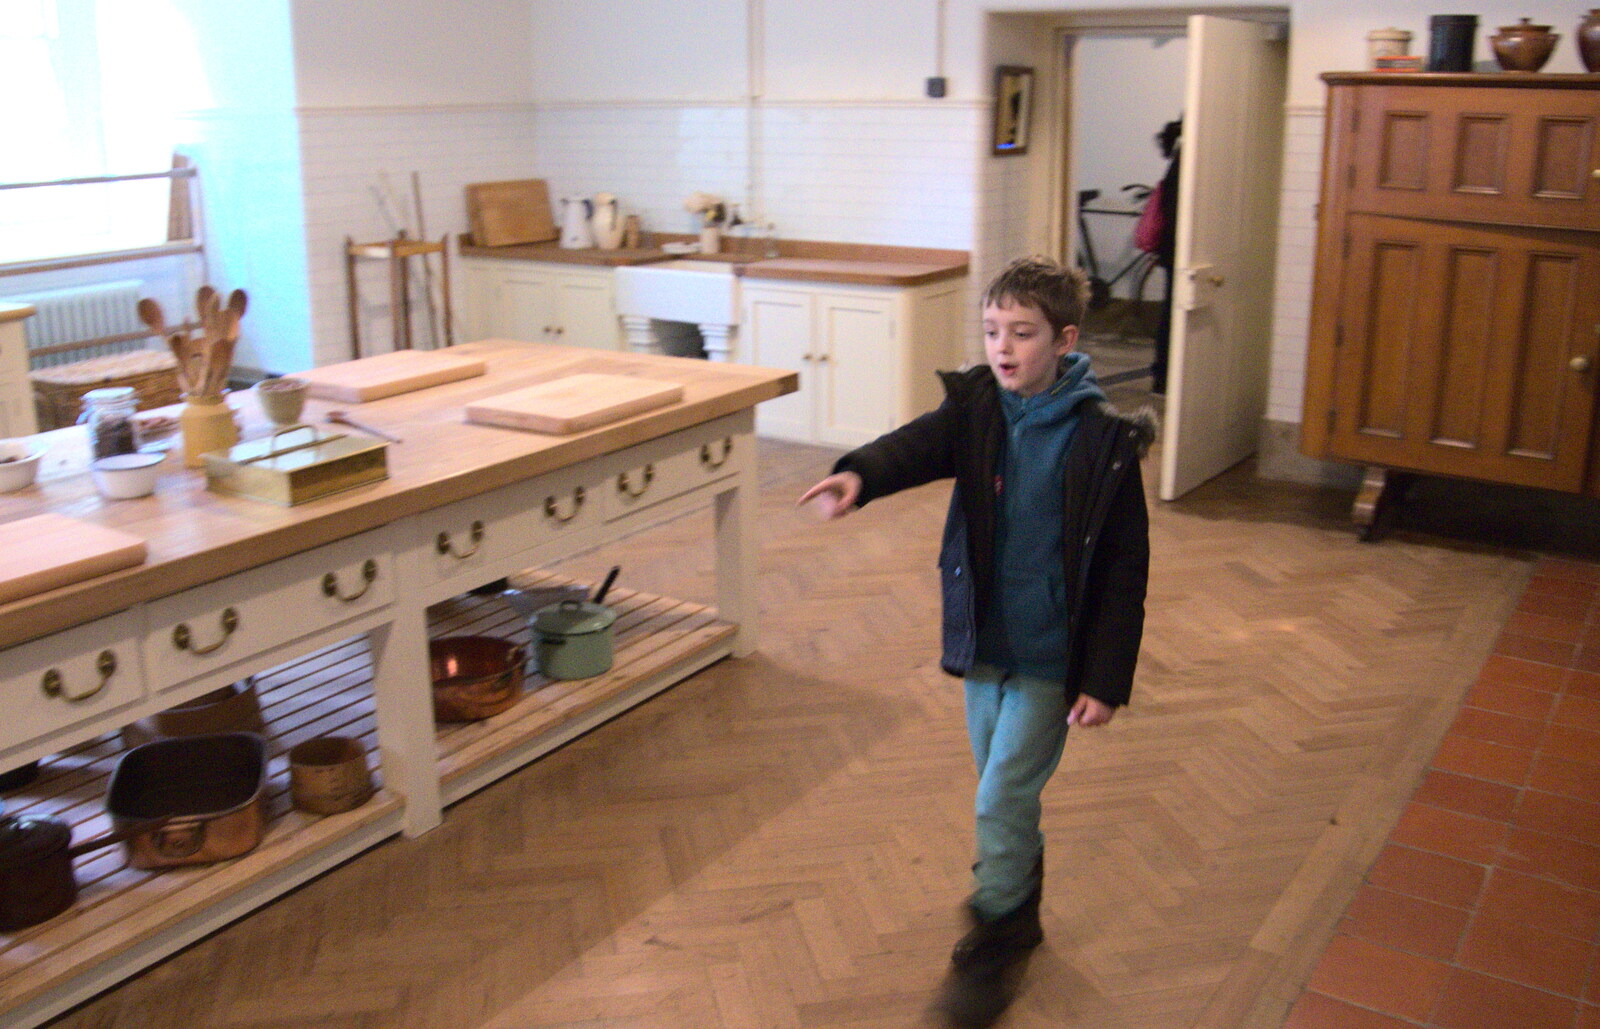 Fred points the way from Life Below Stairs, Ickworth House, Horringer, Suffolk - 28th January 2018